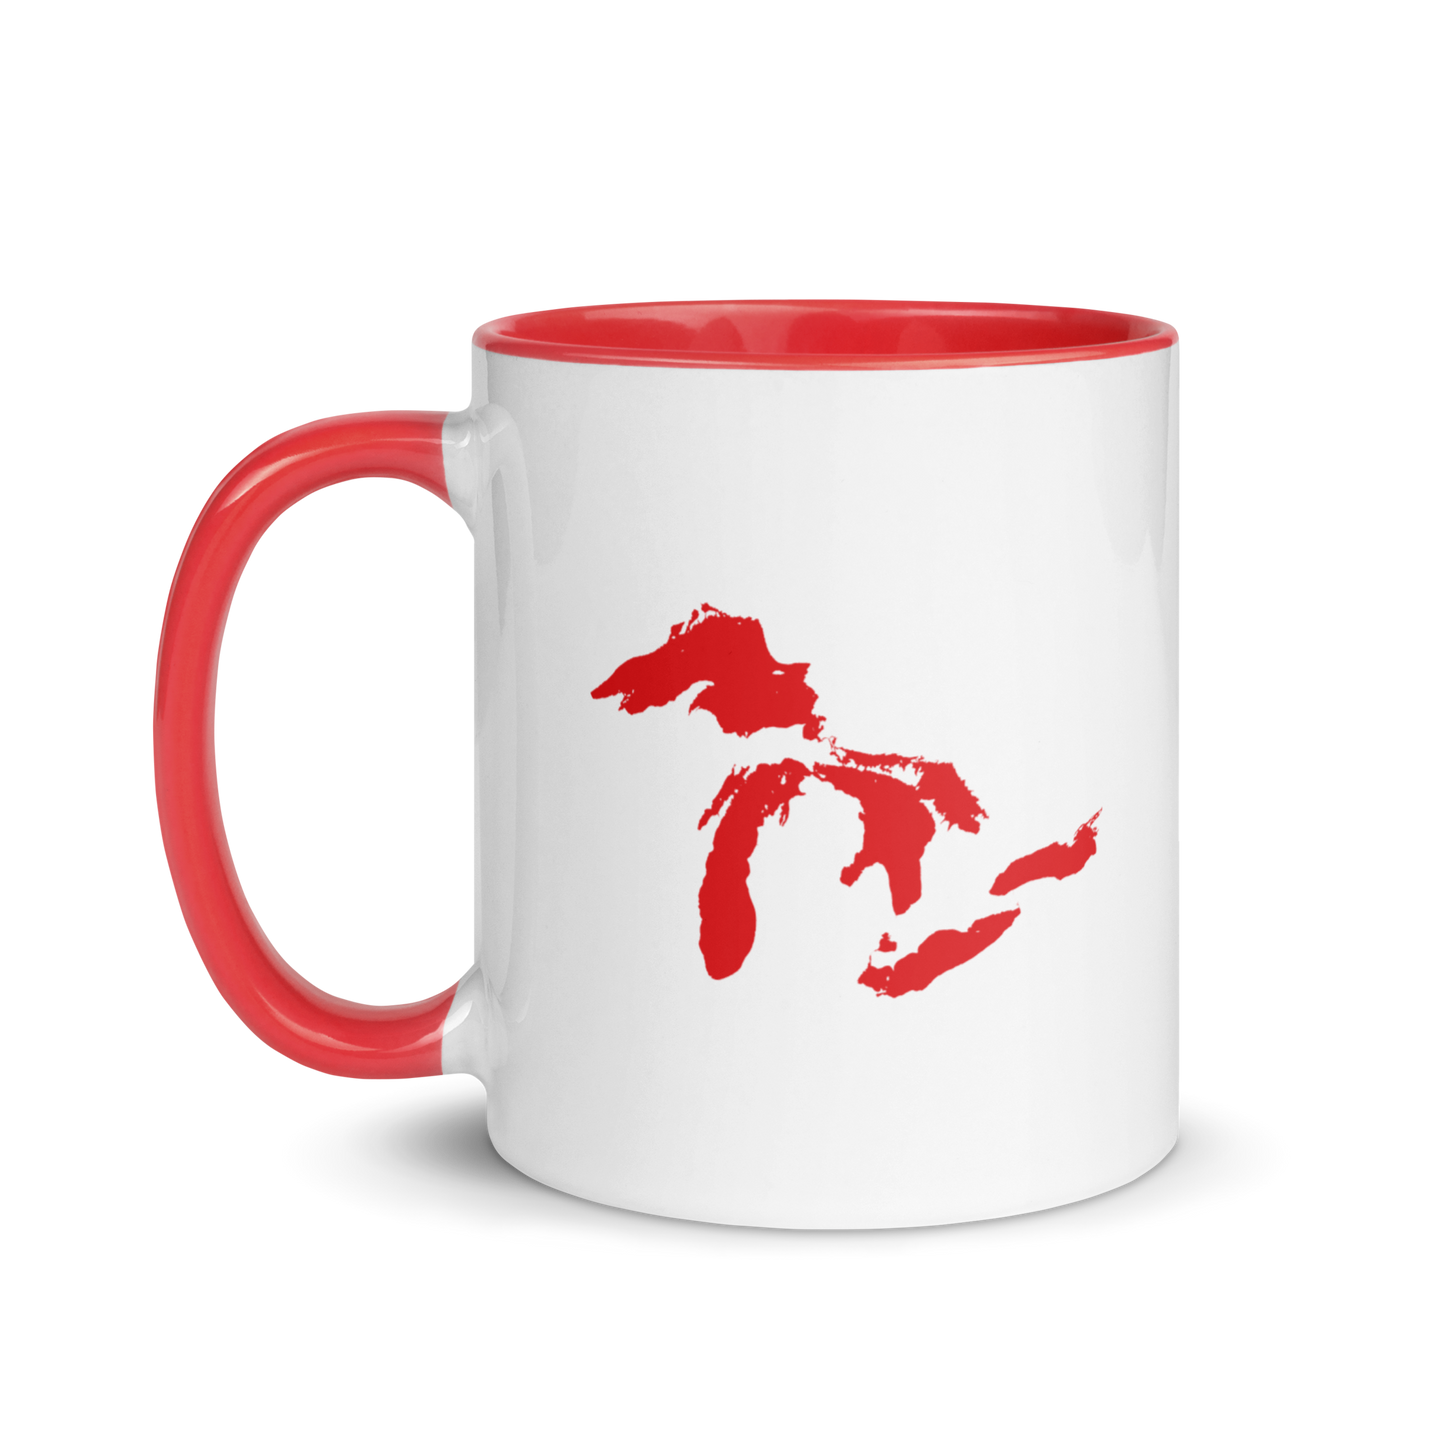 Great Lakes Mug | Color Accent - Red